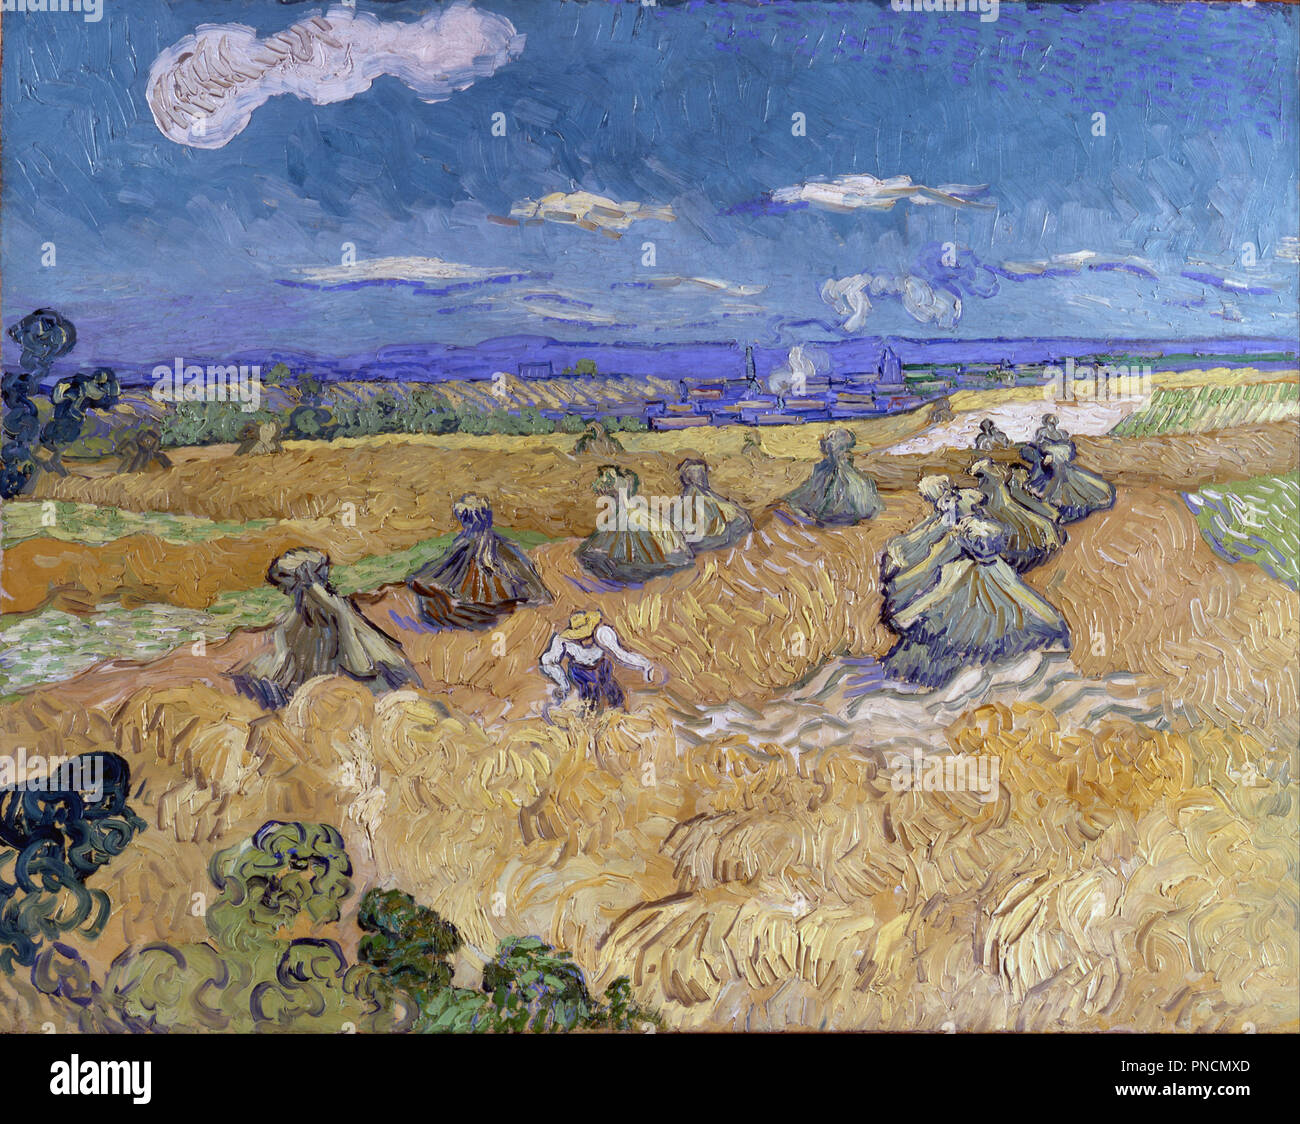 Wheat Stacks with Reaper. Date/Period: Arles, June 1888. Painting. Oil on canvas. Height: 73.6 cm (28.9 in); Width: 93 cm (36.6 in). Author: VINCENT VAN GOGH. Stock Photo